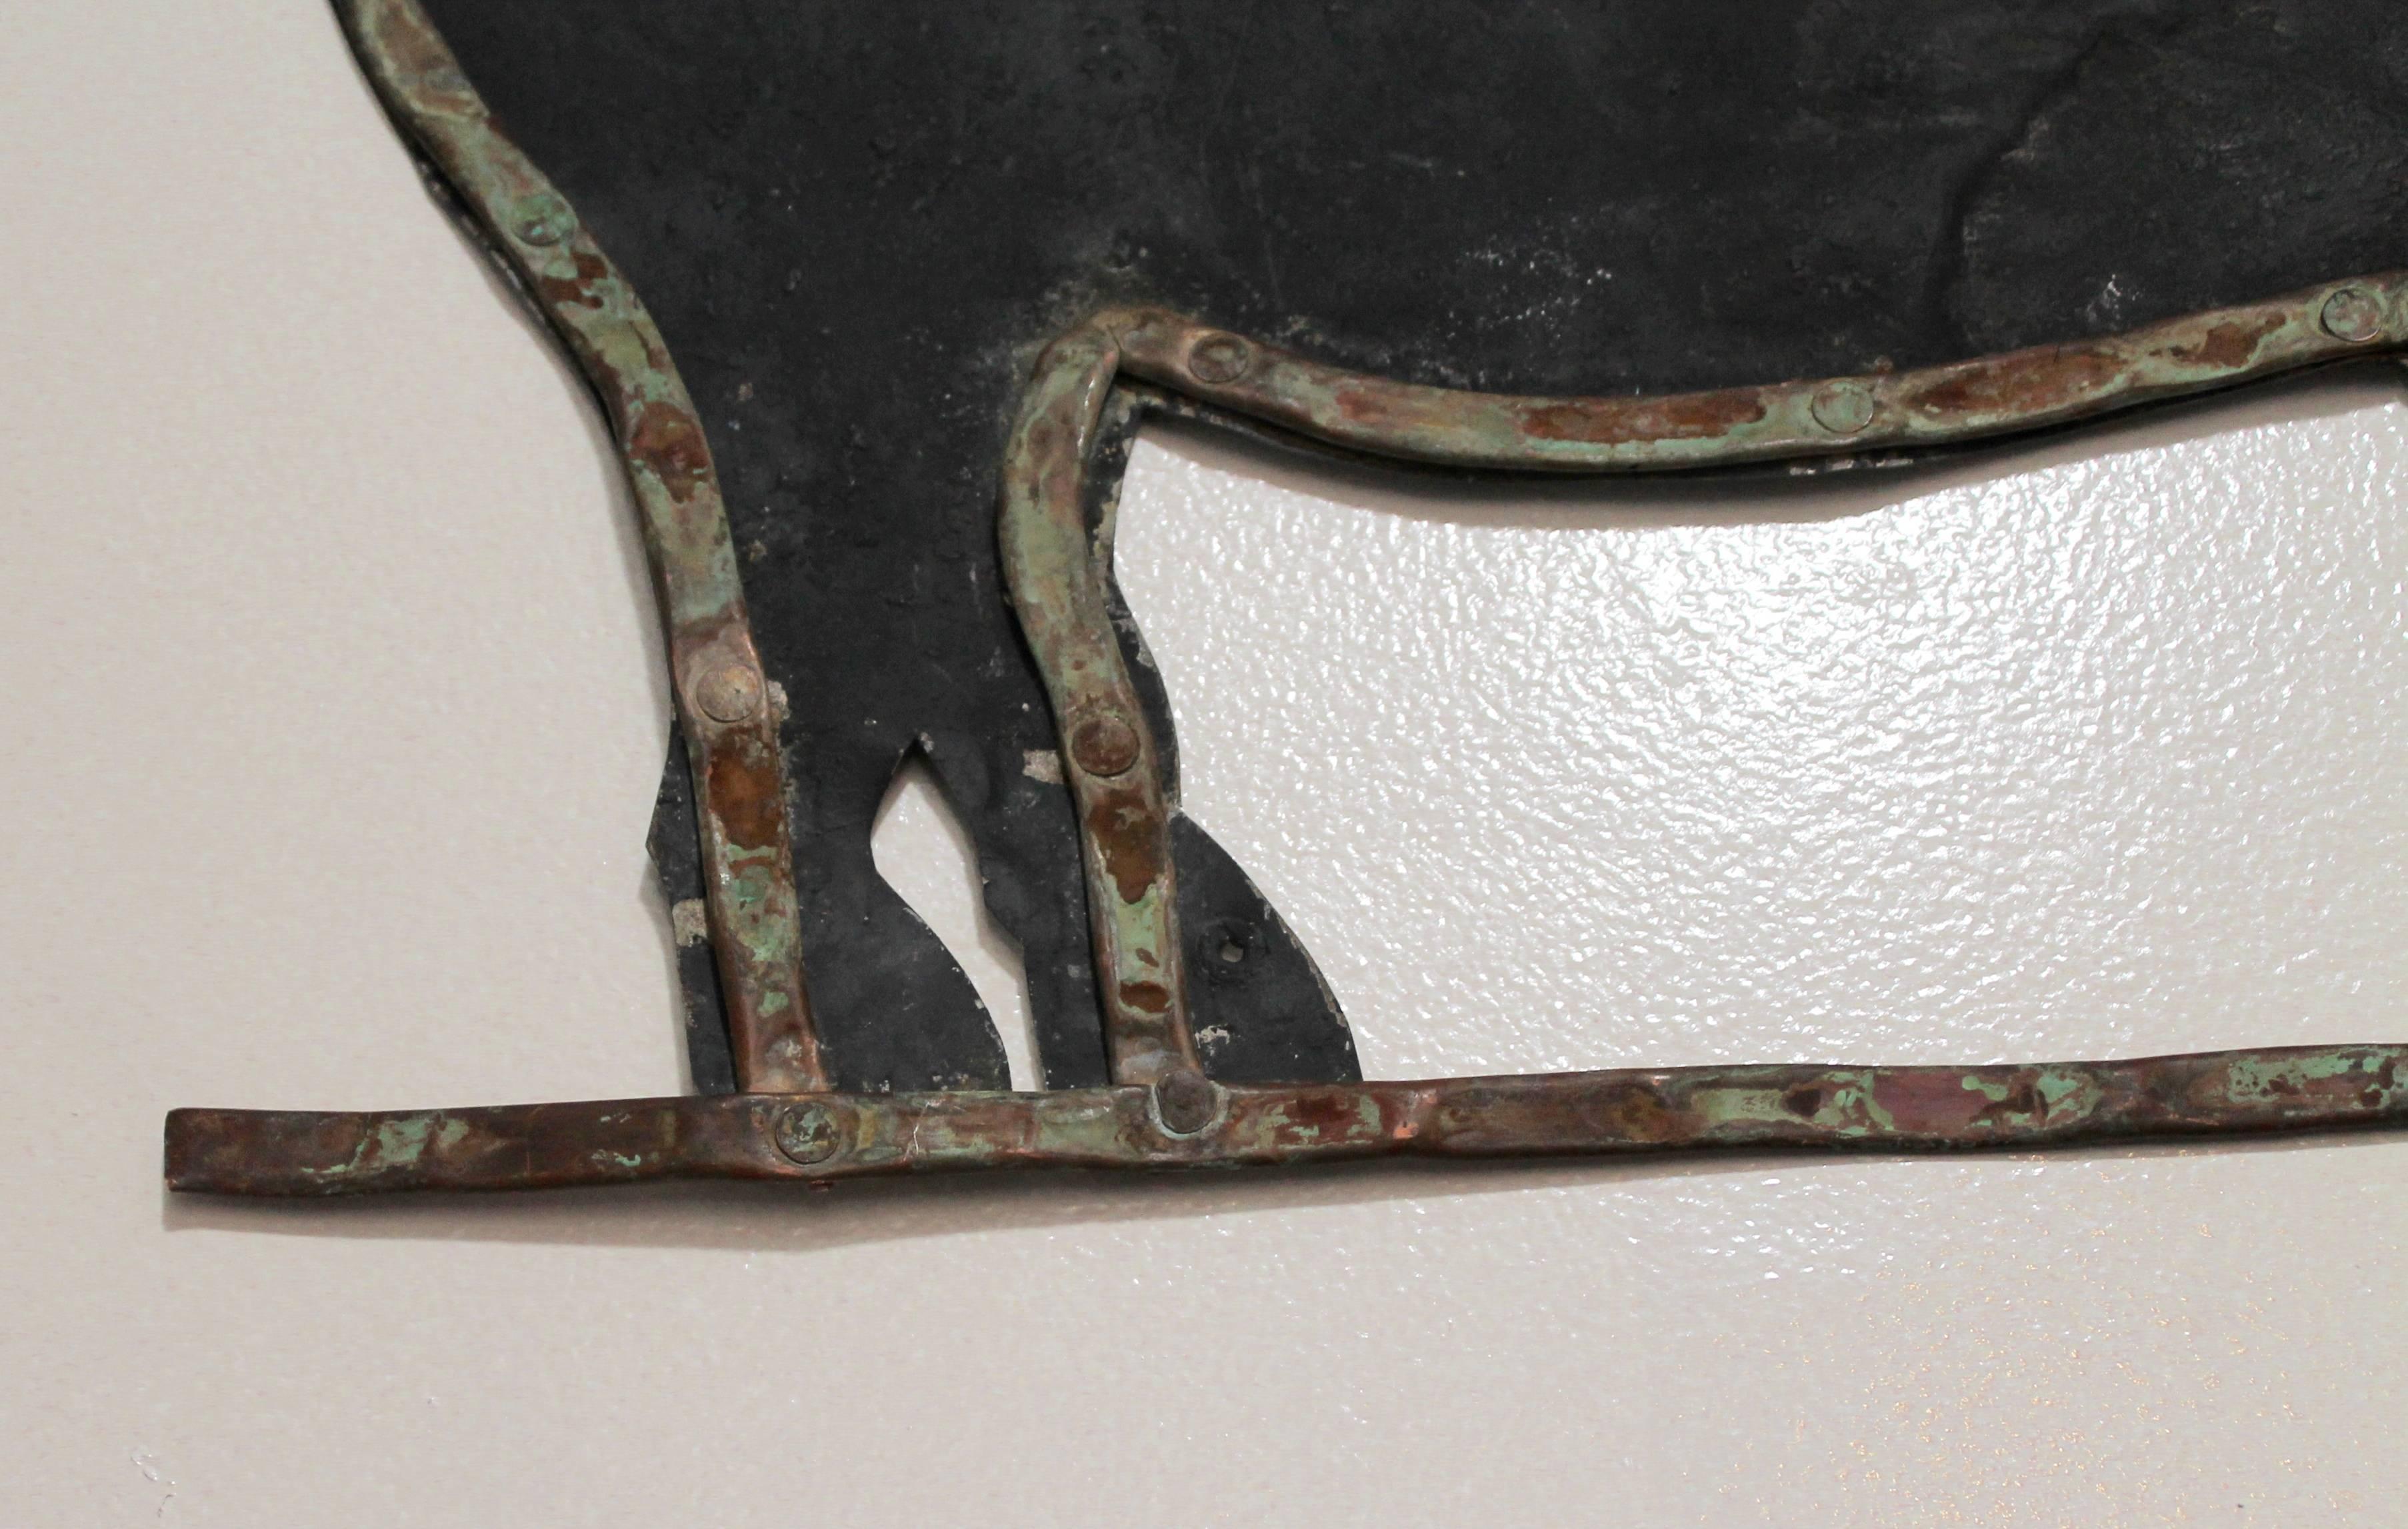 This pig sign was probably used for a pig or hog farm in the Midwest. The sign is comprised of galvanized tin and trimmed in copper piping that was flattened with a copper stem. It almost looks like it was a make do sign made from a weather vane.